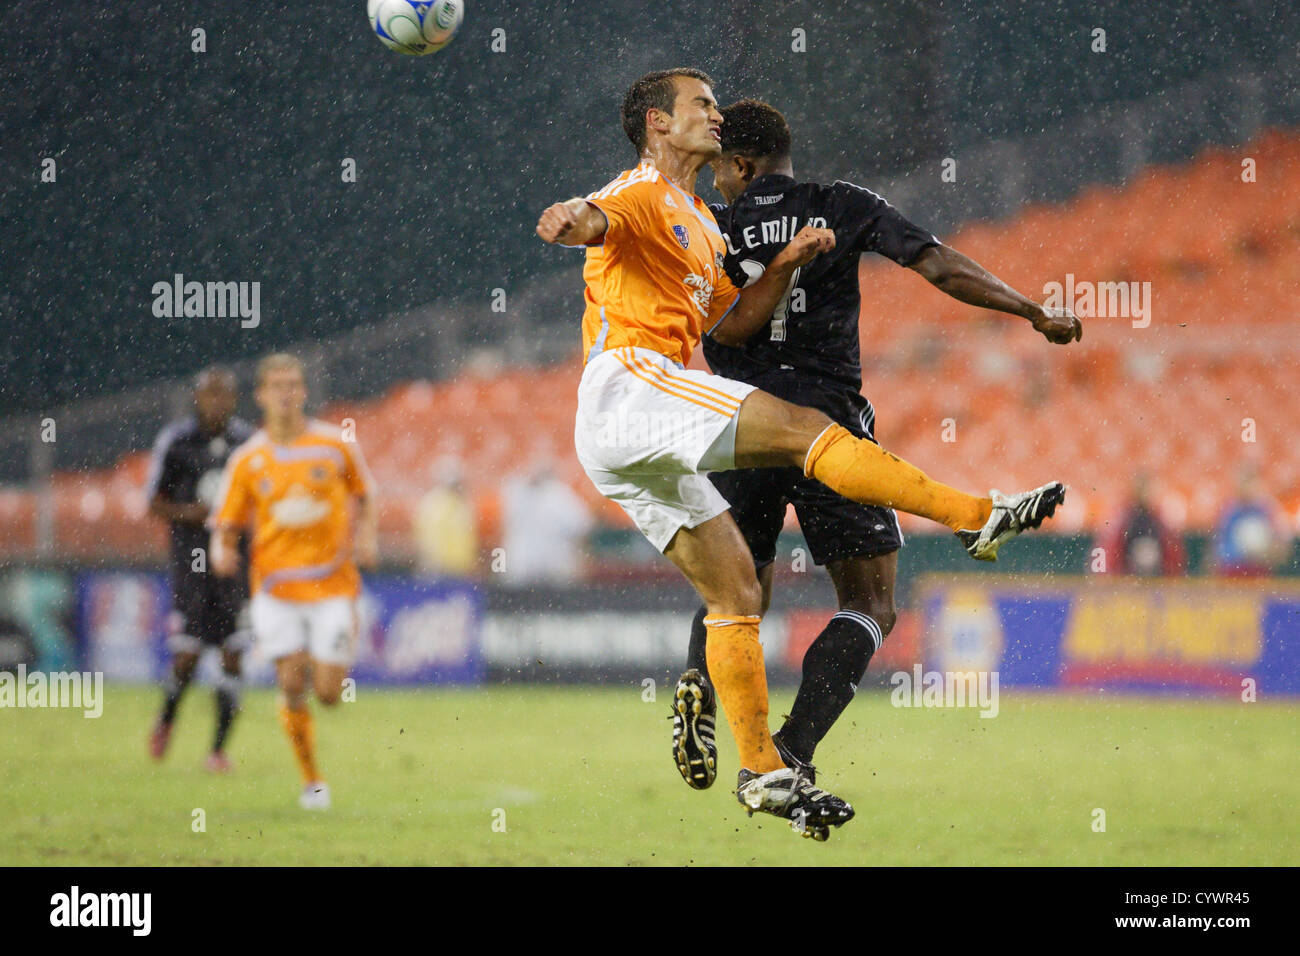 Patrick Ianni of the Houston Dynamo (L) and Luciano Emilio of DC United (R) contest a header during a Major League soccer match. Stock Photo